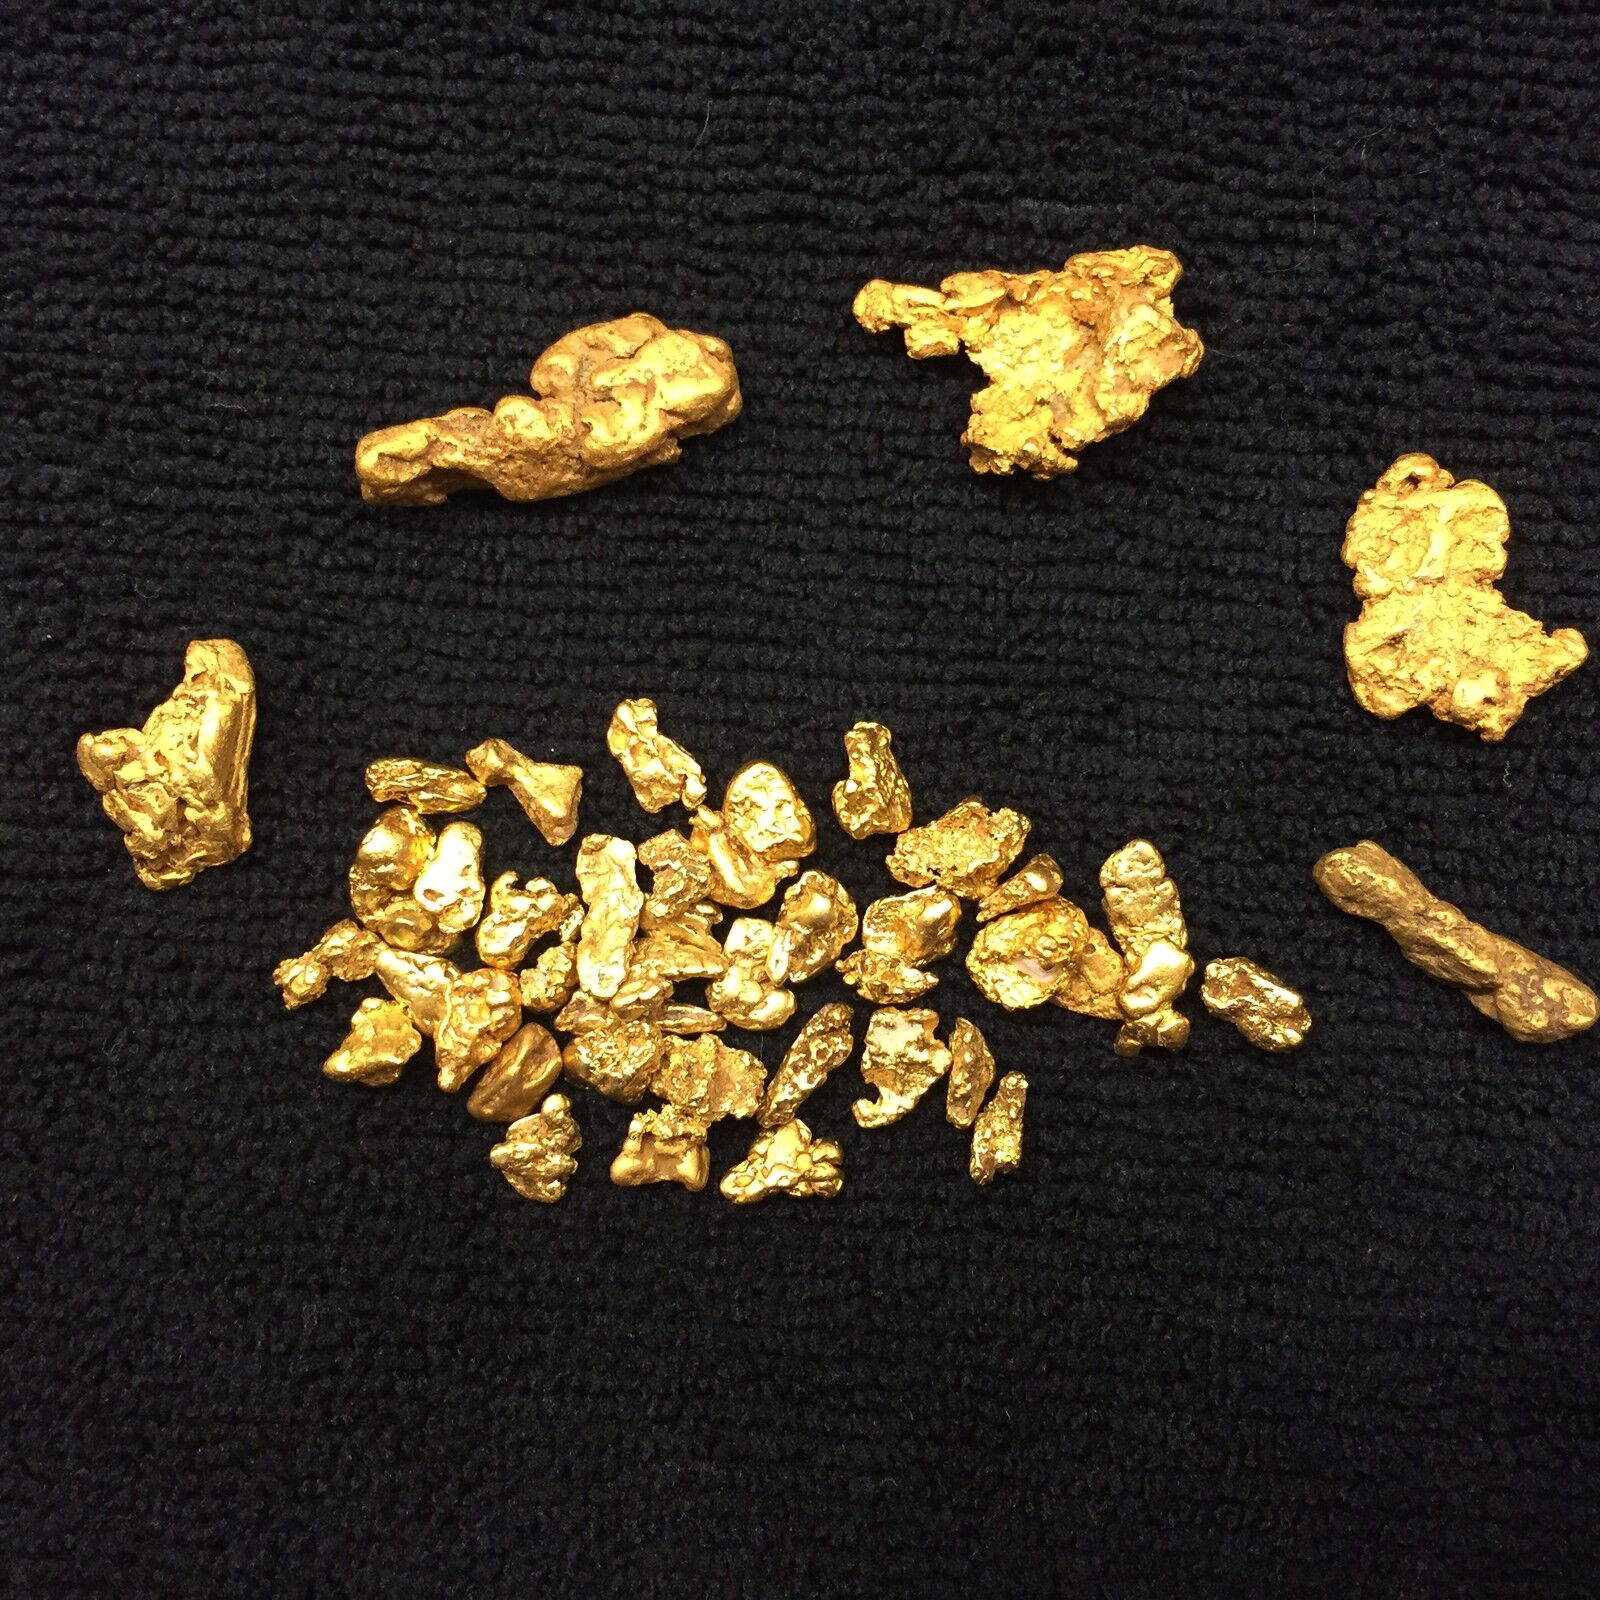 5 lb Gold Paydirt Unsearched and Gold Added Panning Nugget - BUY 3 GET 3 FREE